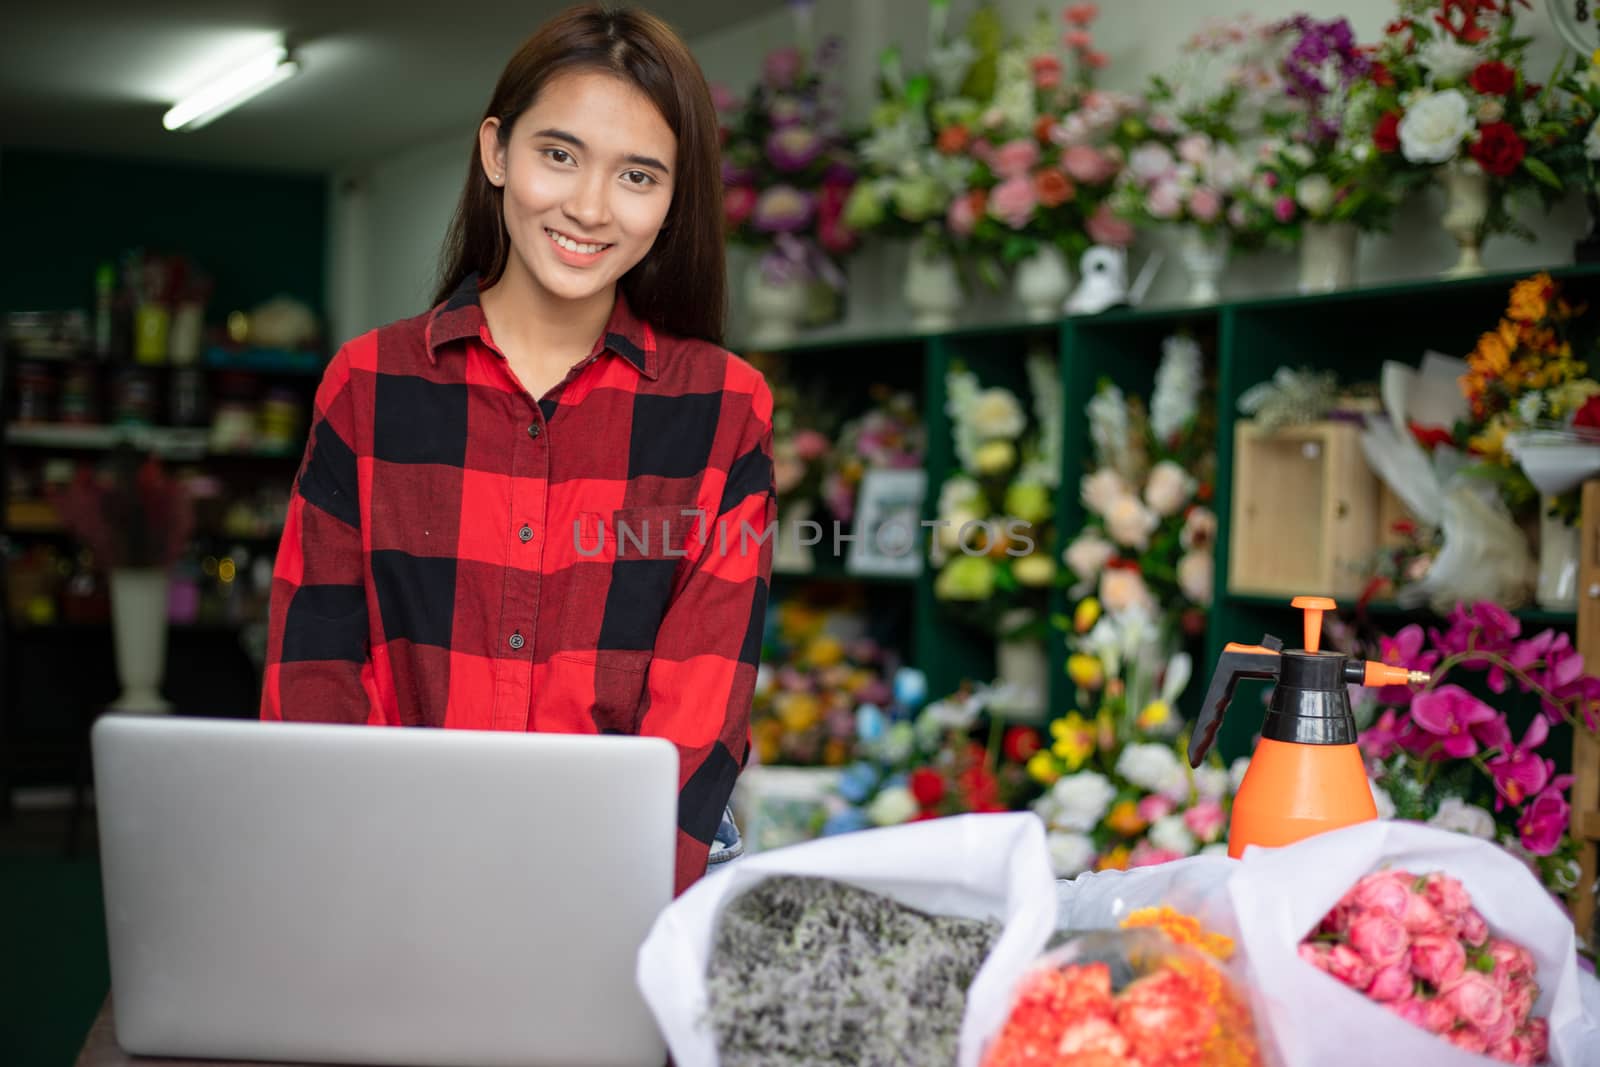 Asian women florists using notebook for working and smiling in flower shop